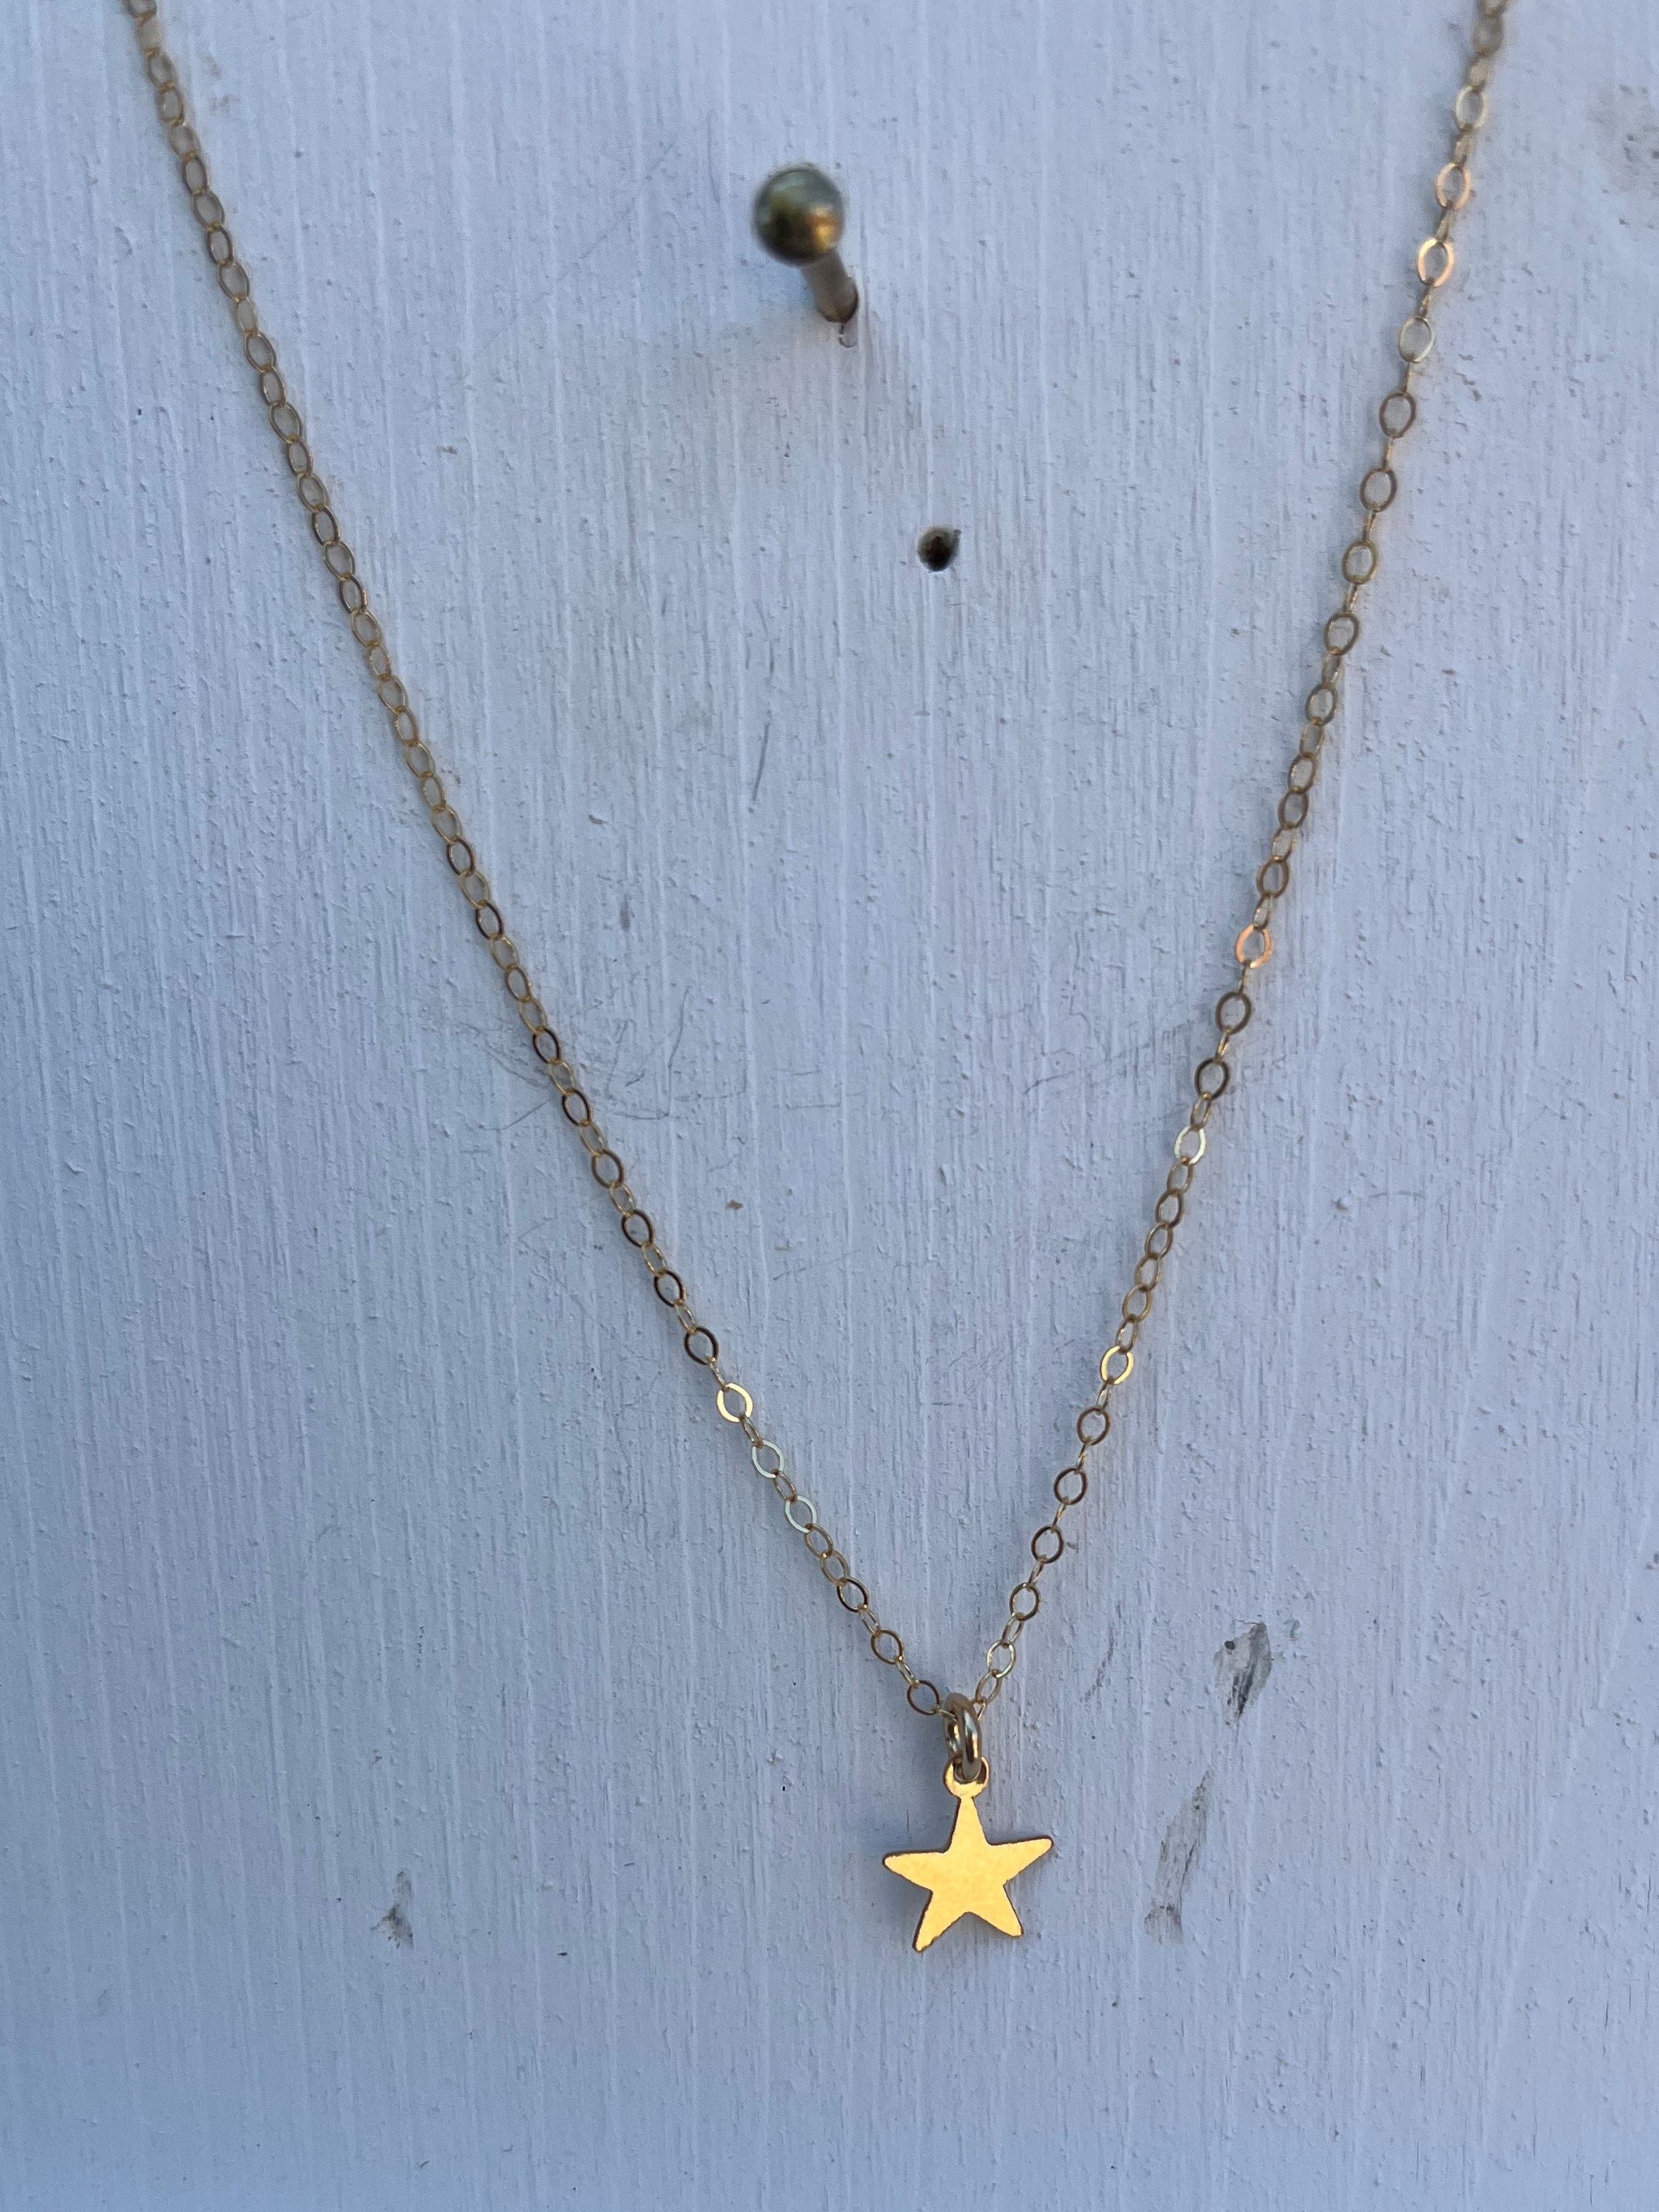 Dainty Gold Necklaces with Shaped Pendants